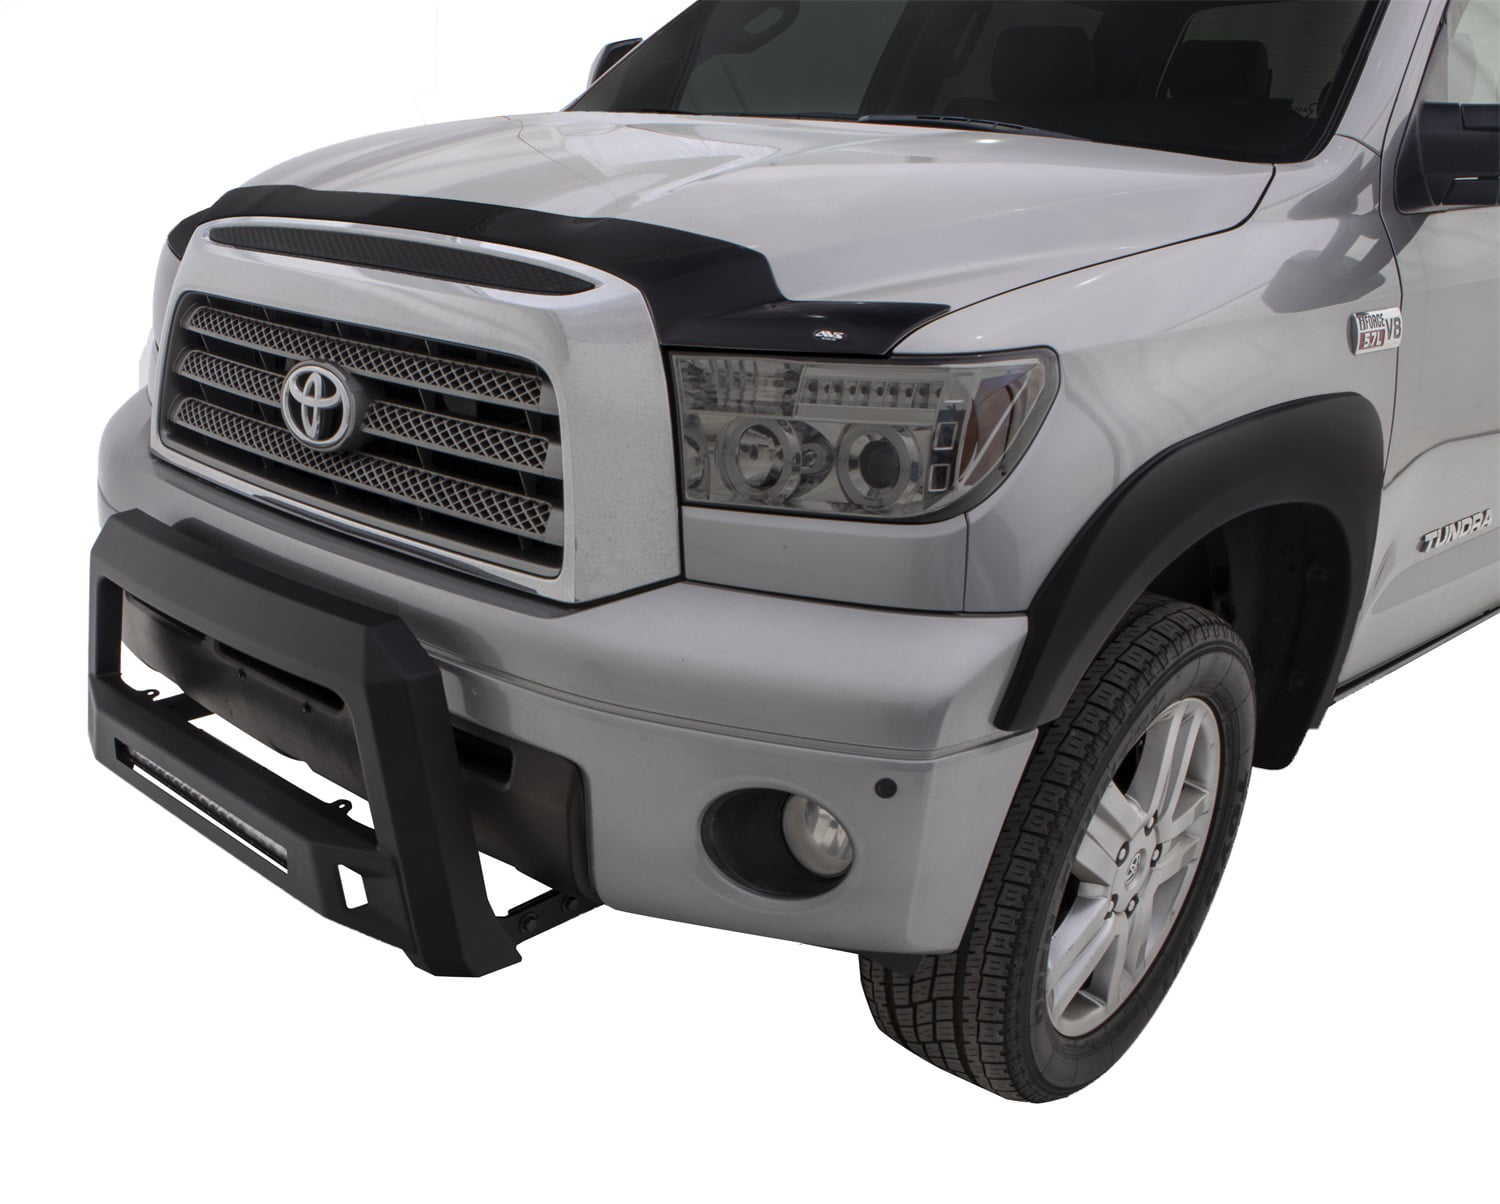 3％OFFクーポン利用でポイント最大8倍相当 TLAPS 7422444184116 For 2007-2021 Toyota  Tundra/2008-2021 Sequoia Matte Black AVT style Aluminum LED Light Bull Bar  Guard with Stainless Skid Pla